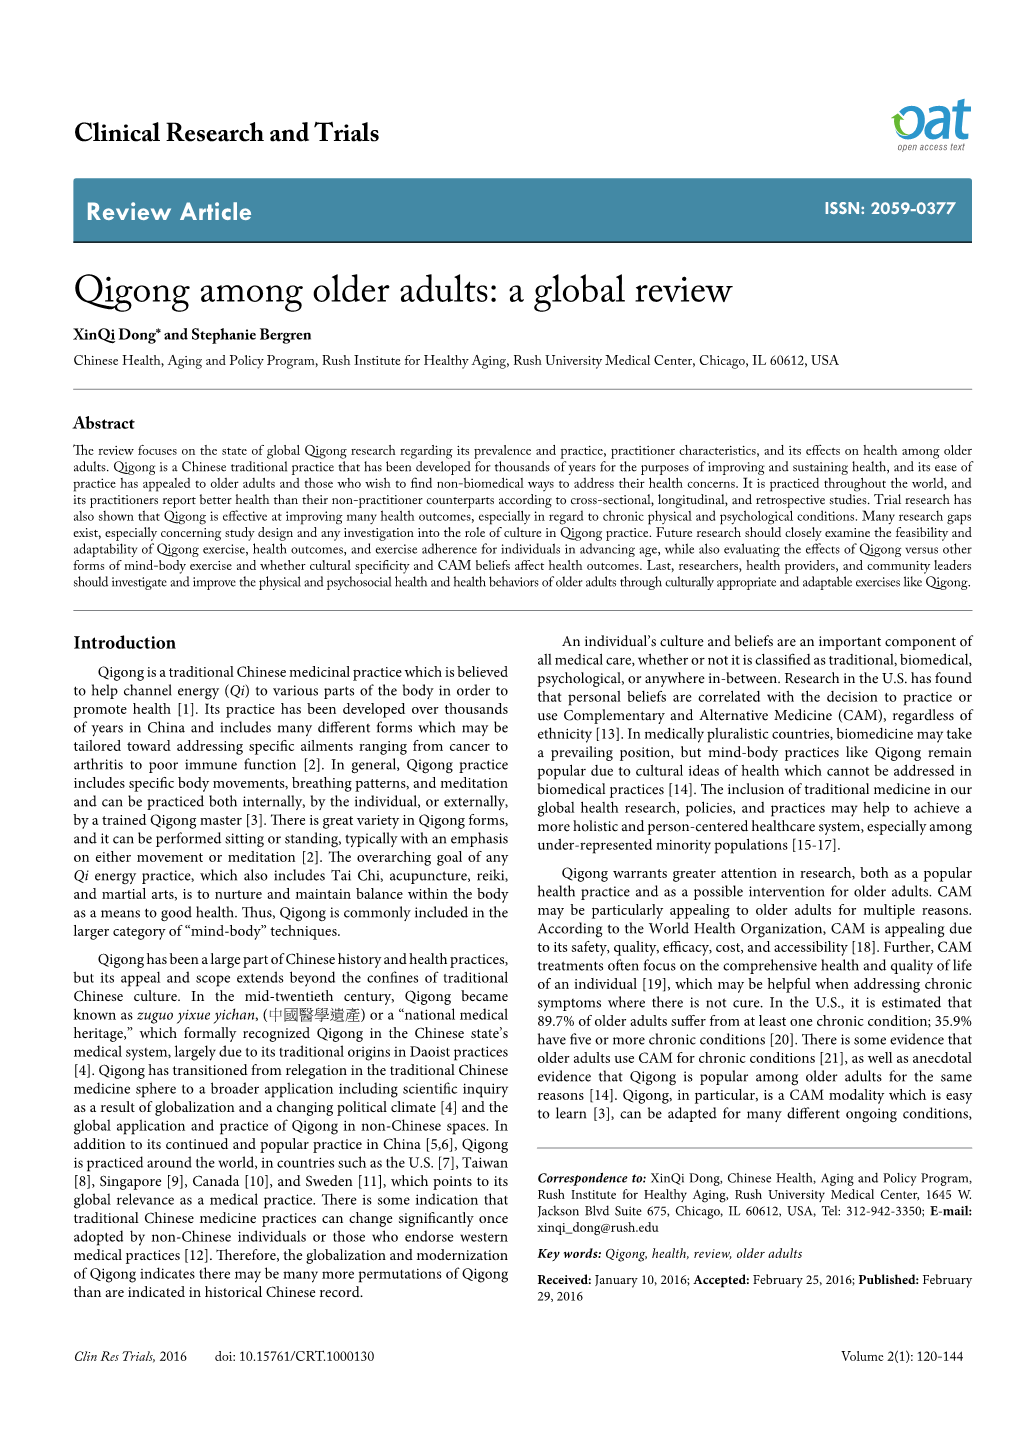 Qigong Among Older Adults: a Global Review